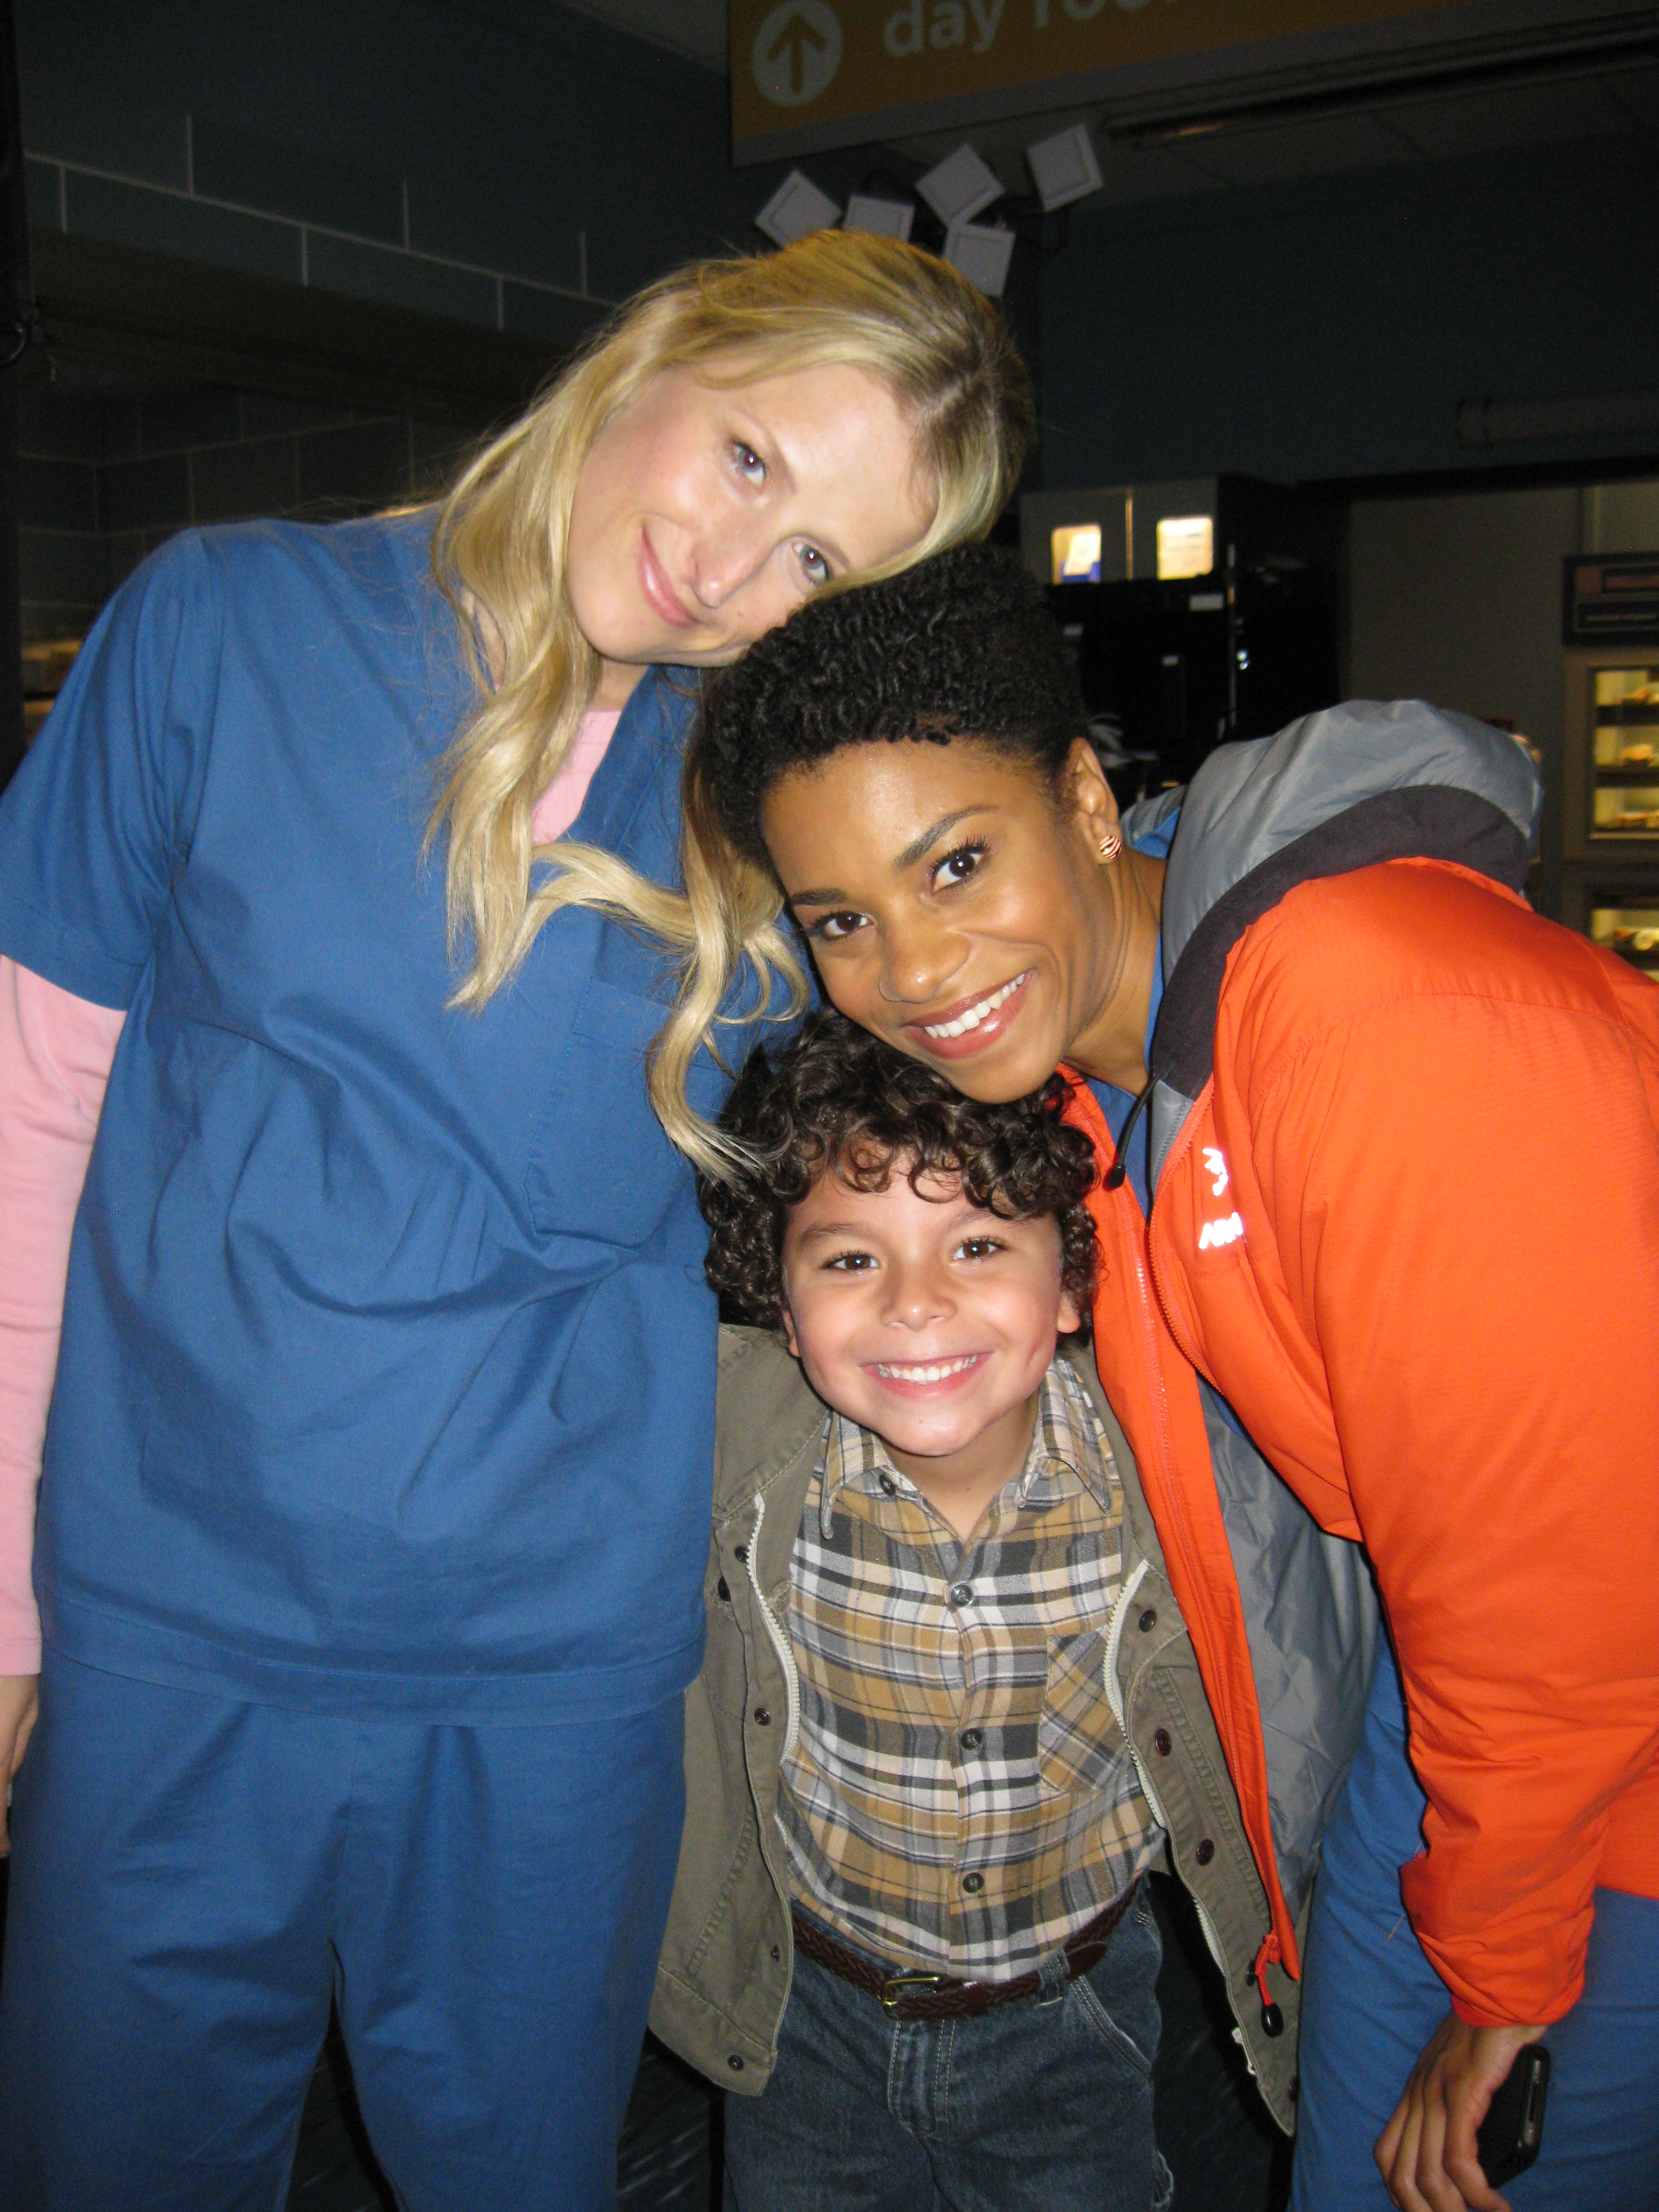 Bruce onset of Emily Owens with Mamie Gummer & Kelly McCreary